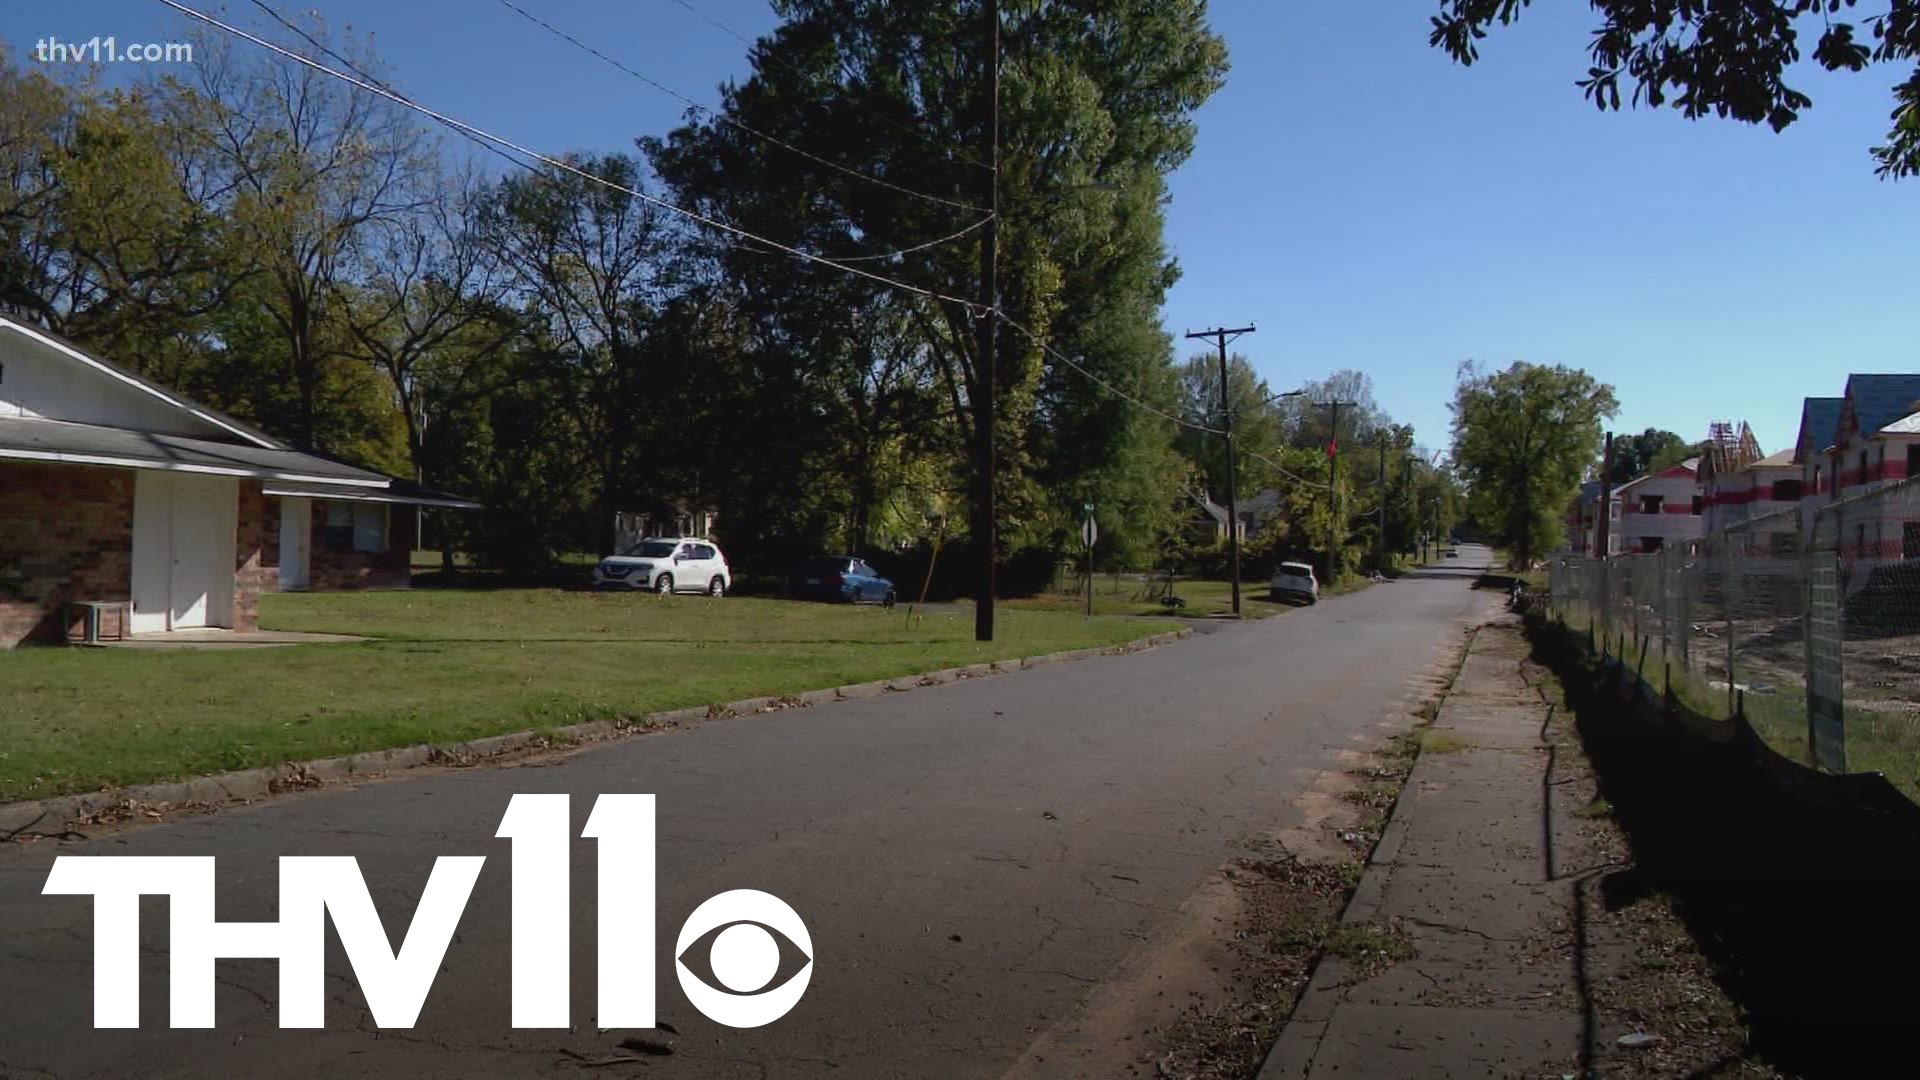 North Little Rock police officers are investigating a "suspicious death" after a man was found dead near a roadway on Saturday afternoon.